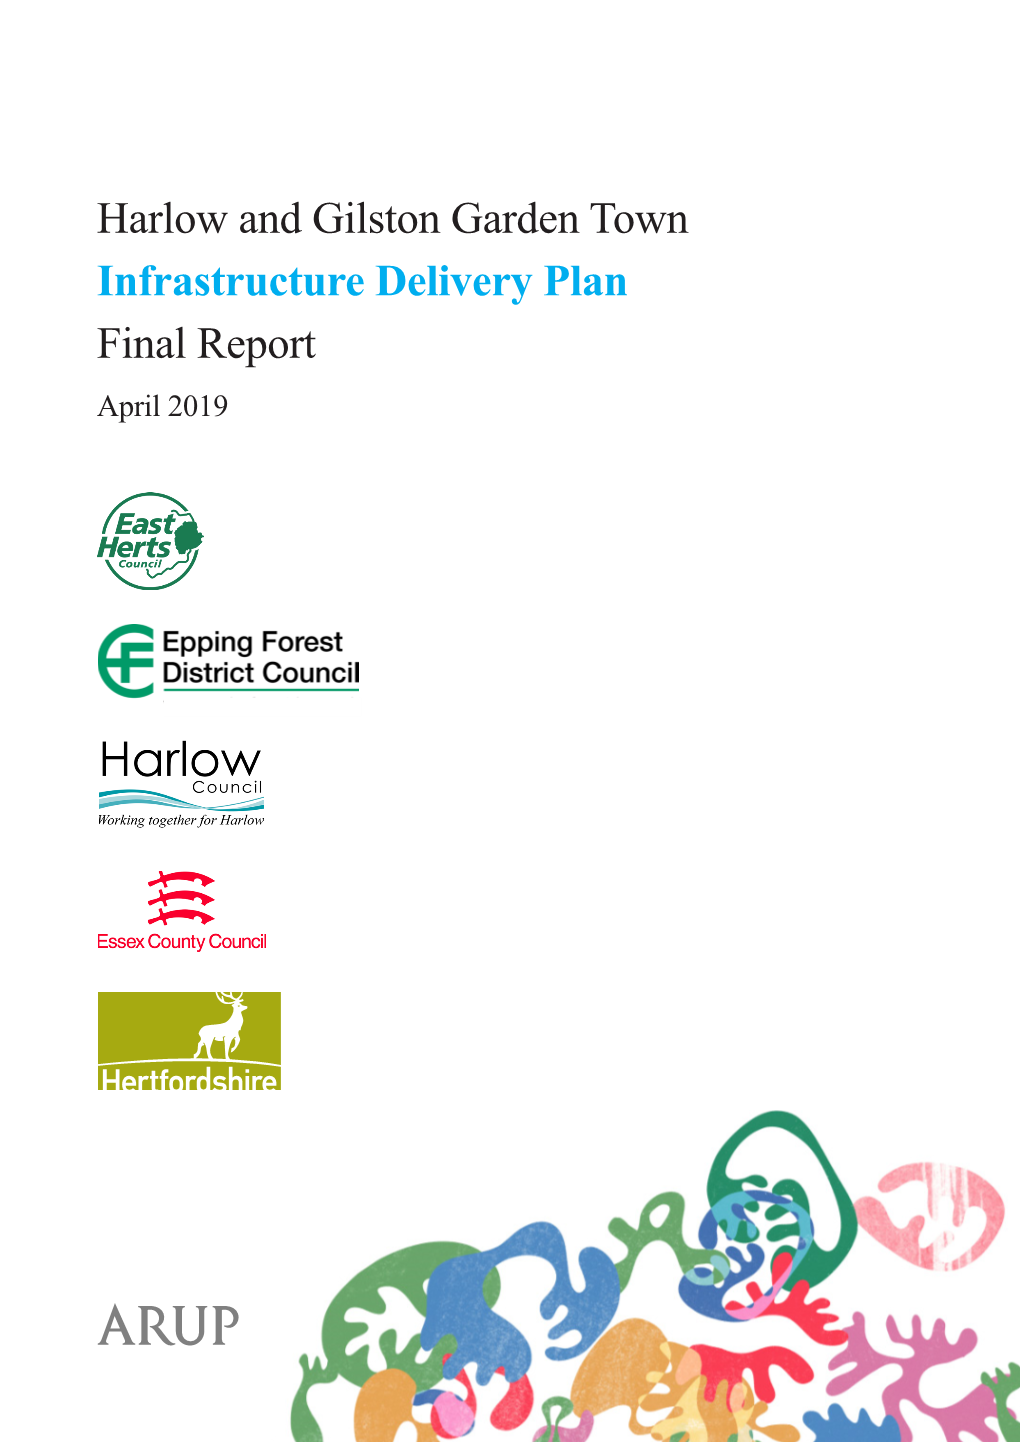 Harlow and Gilston Garden Town Infrastructure Delivery Plan Final